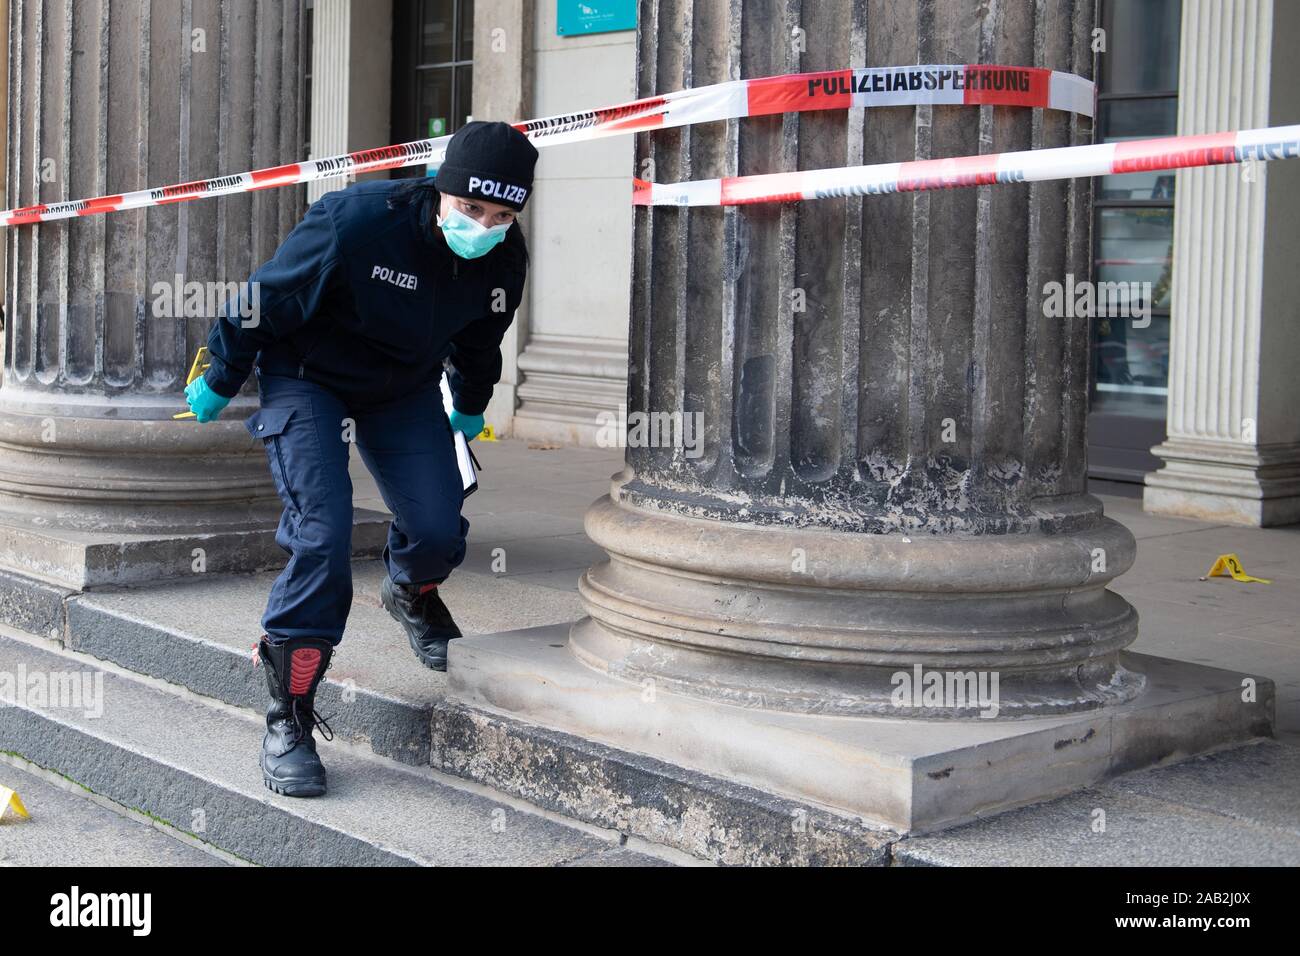 Dresden, Germany. 25th Nov, 2019. A police woman walks under a barrier tape in front of the Schinkelwache building. Dresden's Treasury Green Vault was broken into early in the morning. The break-in affects the historical part of the valuable collection. Credit: Sebastian Kahnert/dpa-Zentralbild/dpa/Alamy Live News Stock Photo